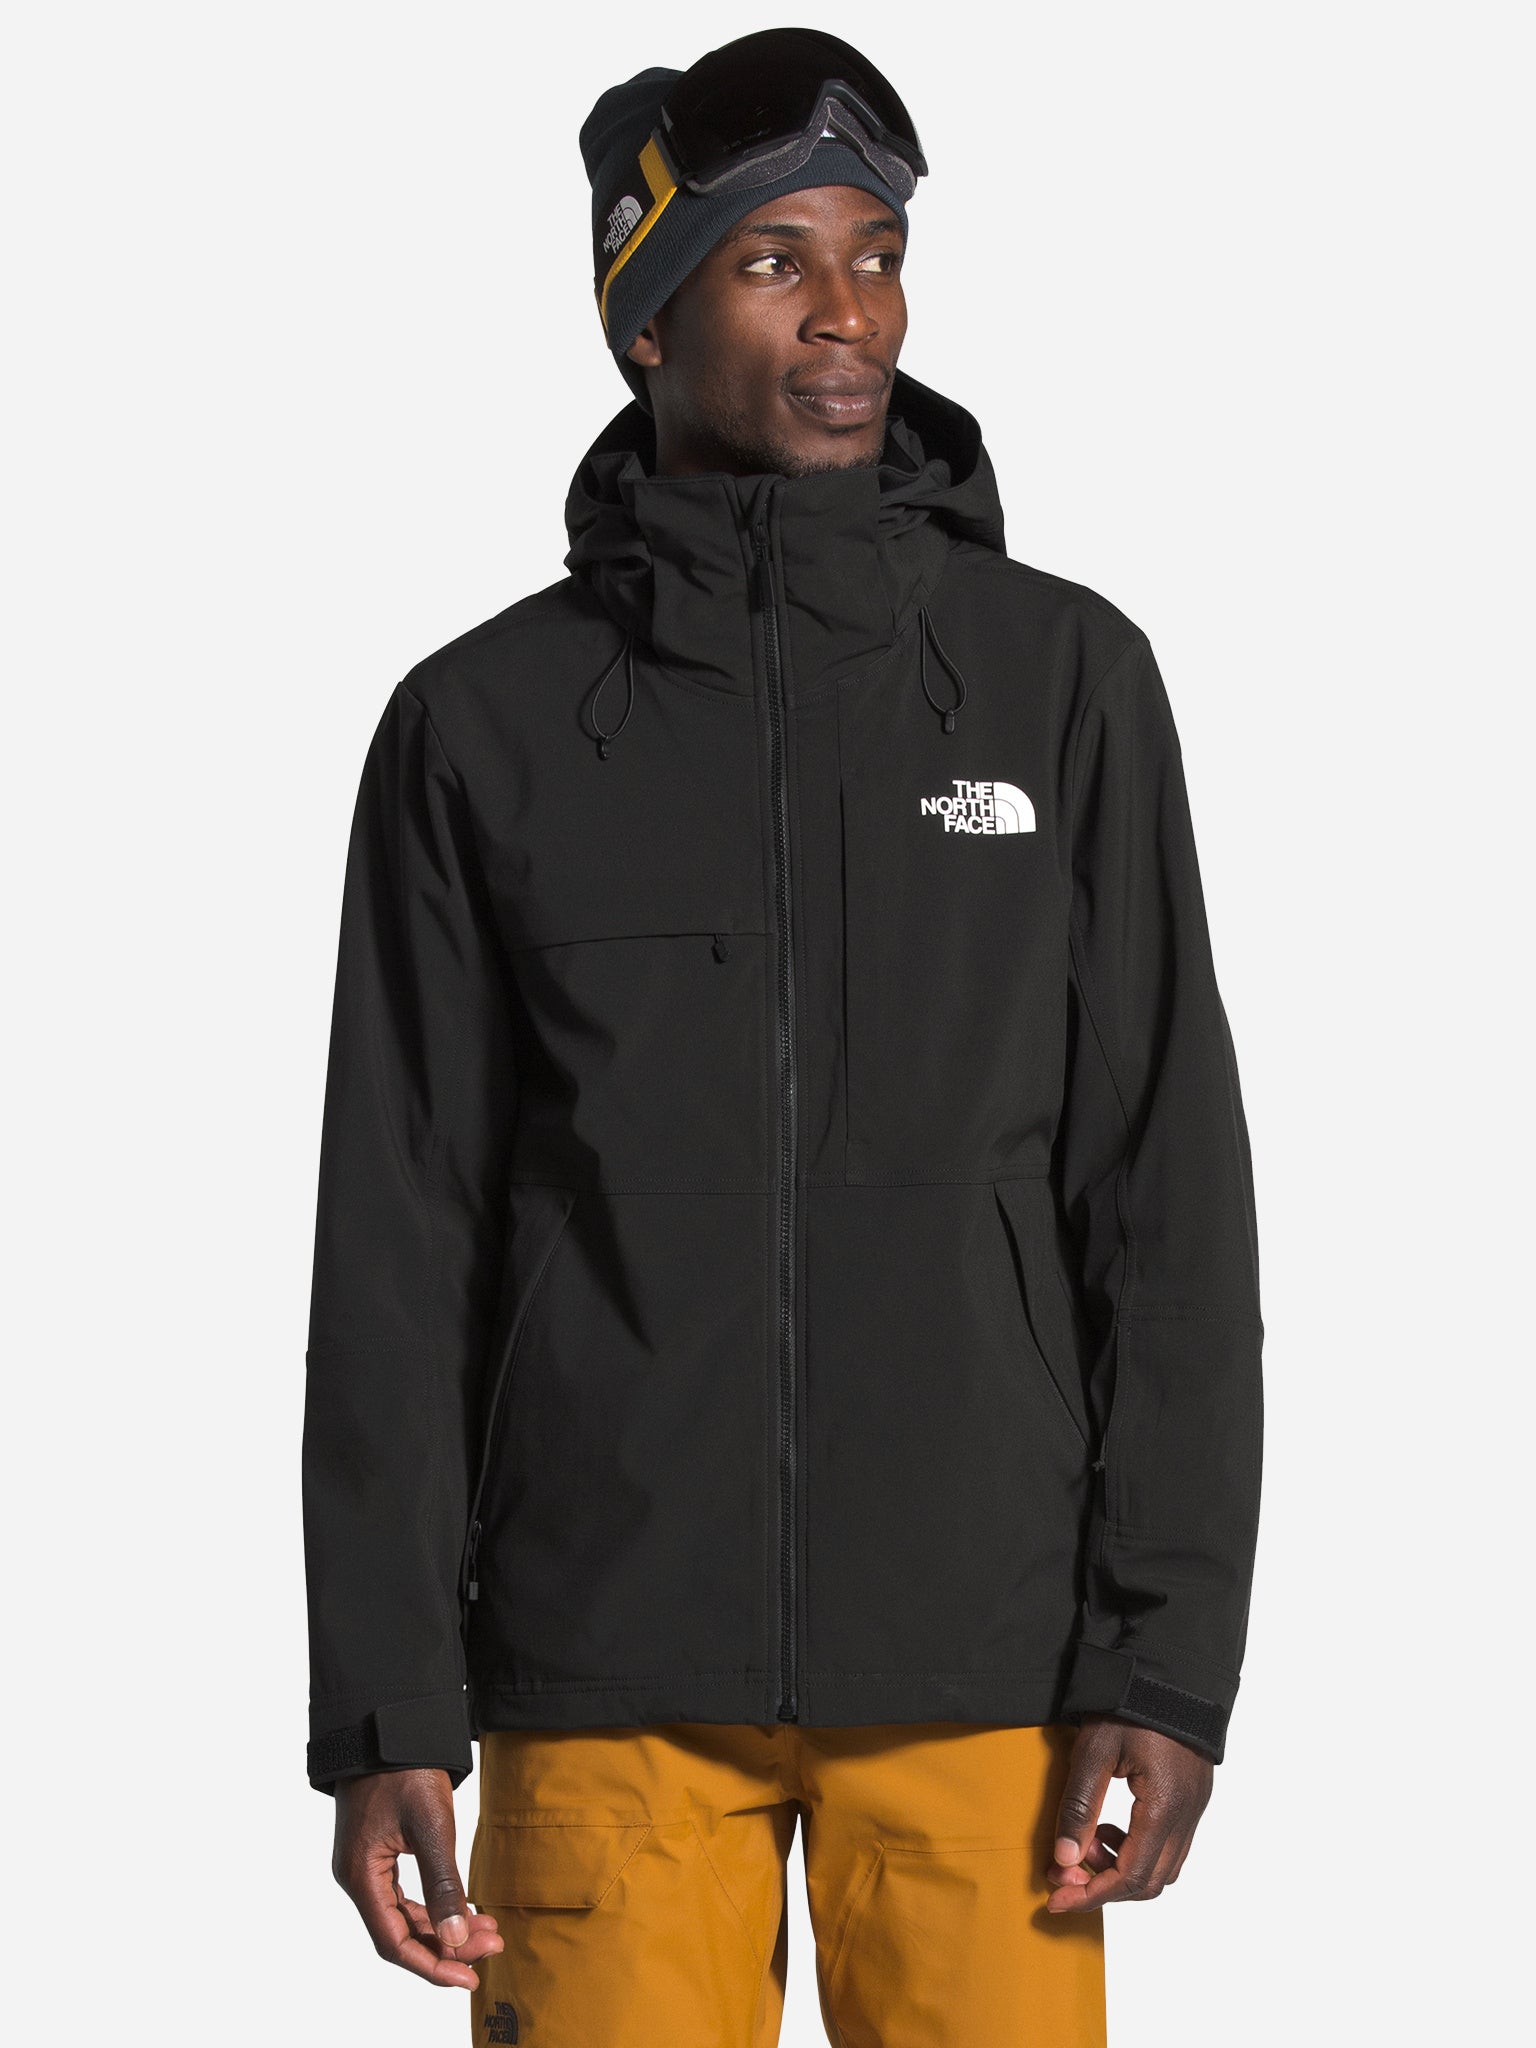 The North Face Men's Apex Storm Peak Triclimate Jacket